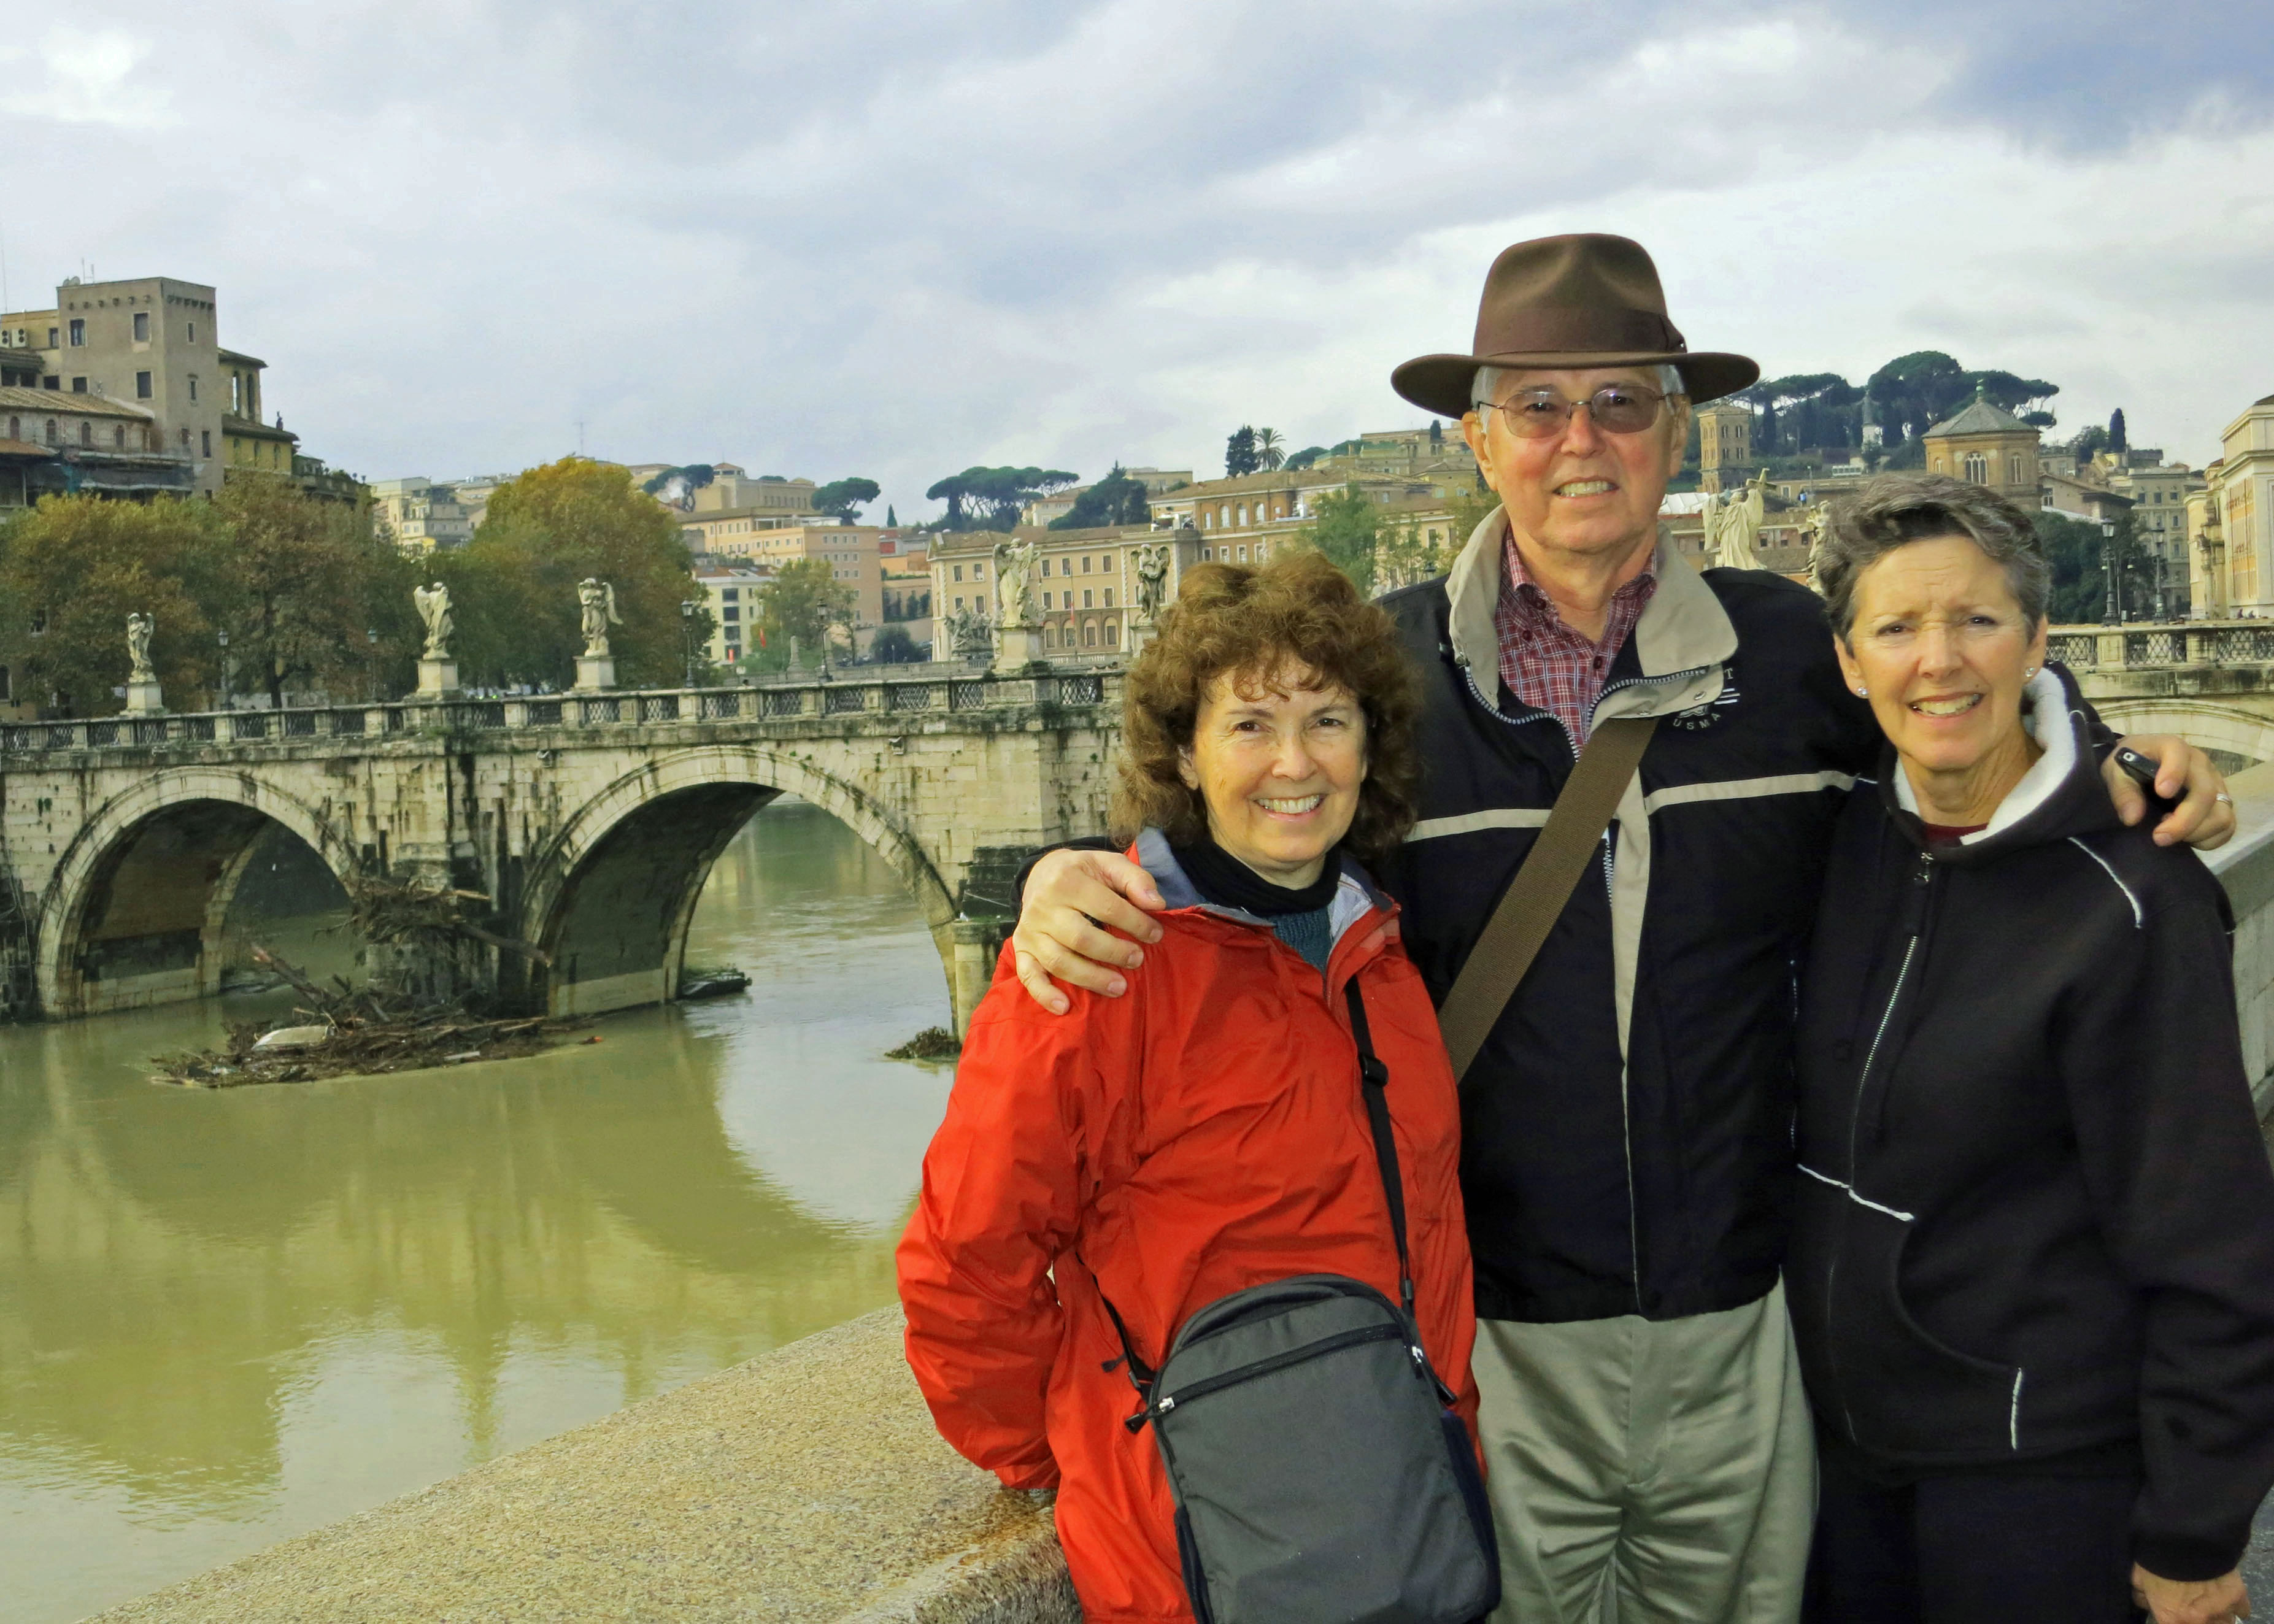 Peggy, her brother John and his wife Frances stand in front of the Tiber River and the Pont St. Angelo (the Bridge of Angels)